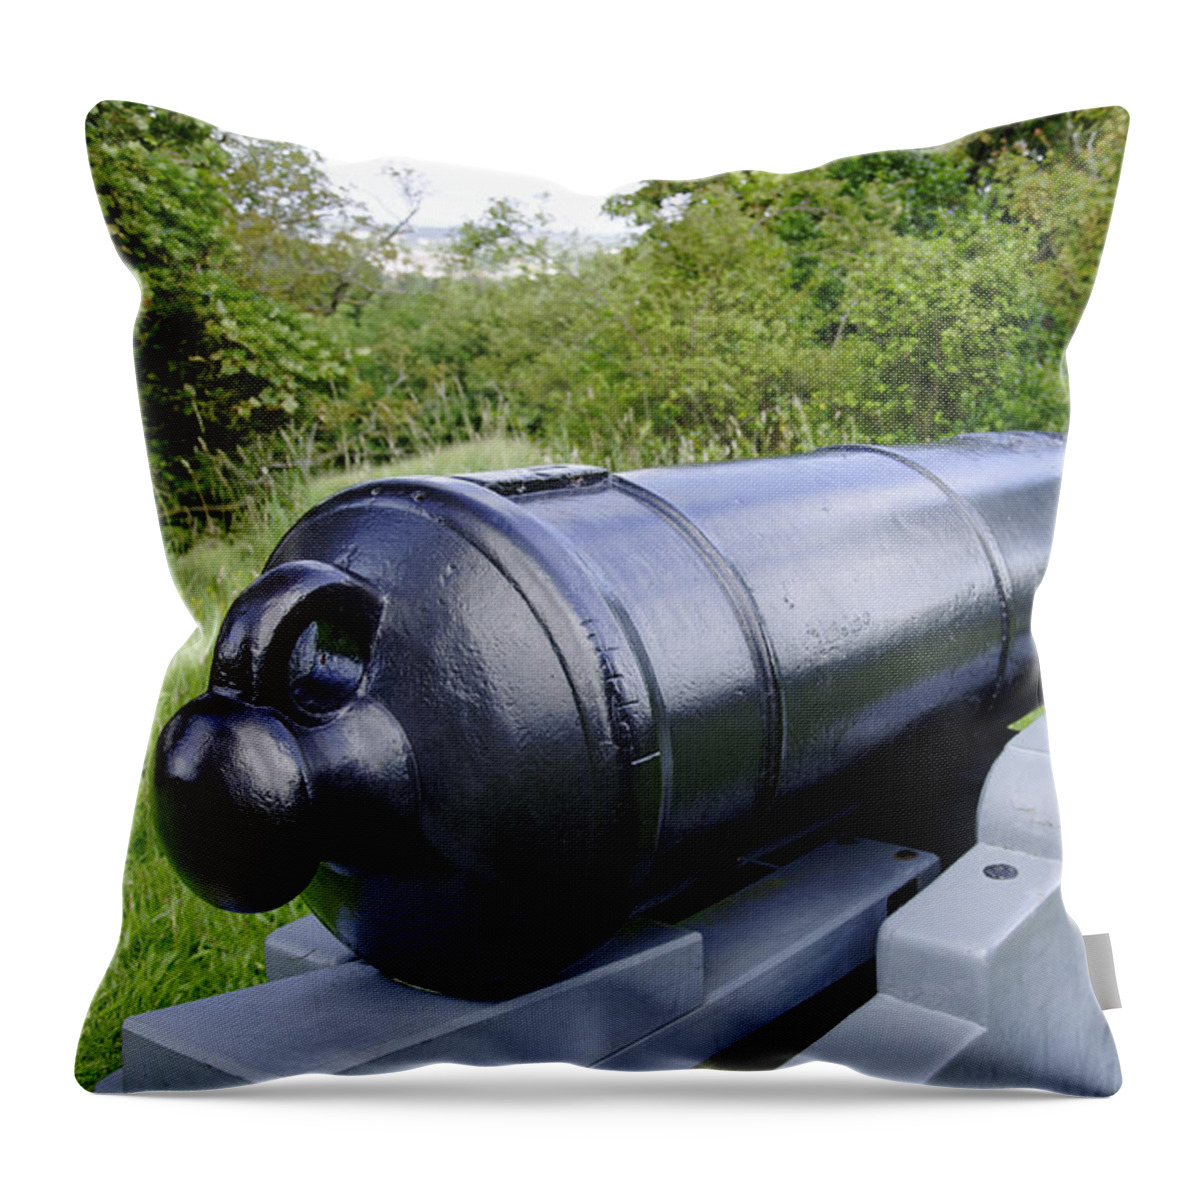 Bright Throw Pillow featuring the photograph East Bastion Gun - Carisbrooke Castle by Rod Johnson